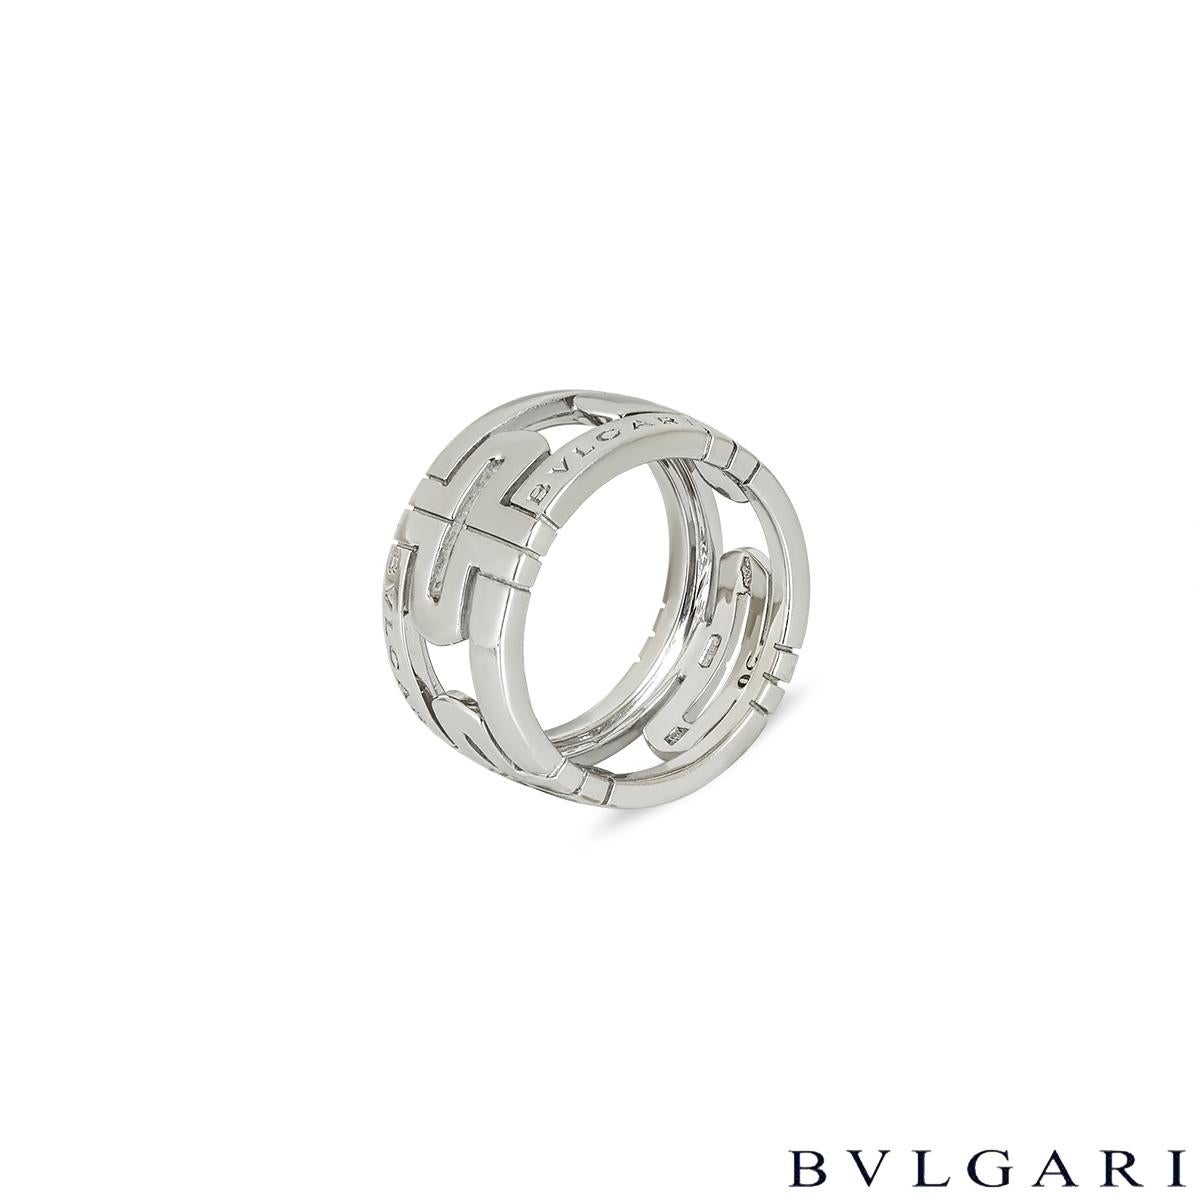 An 18k white gold Parentesi ring by Bvlgari. The ring features 4 lozenge-shaped panels illustrating the iconic Parentesi motif. The ring measures 11mm in width and is a size UK P - EU 56, with a gross weight of 11 grams.
 
Comes complete with a